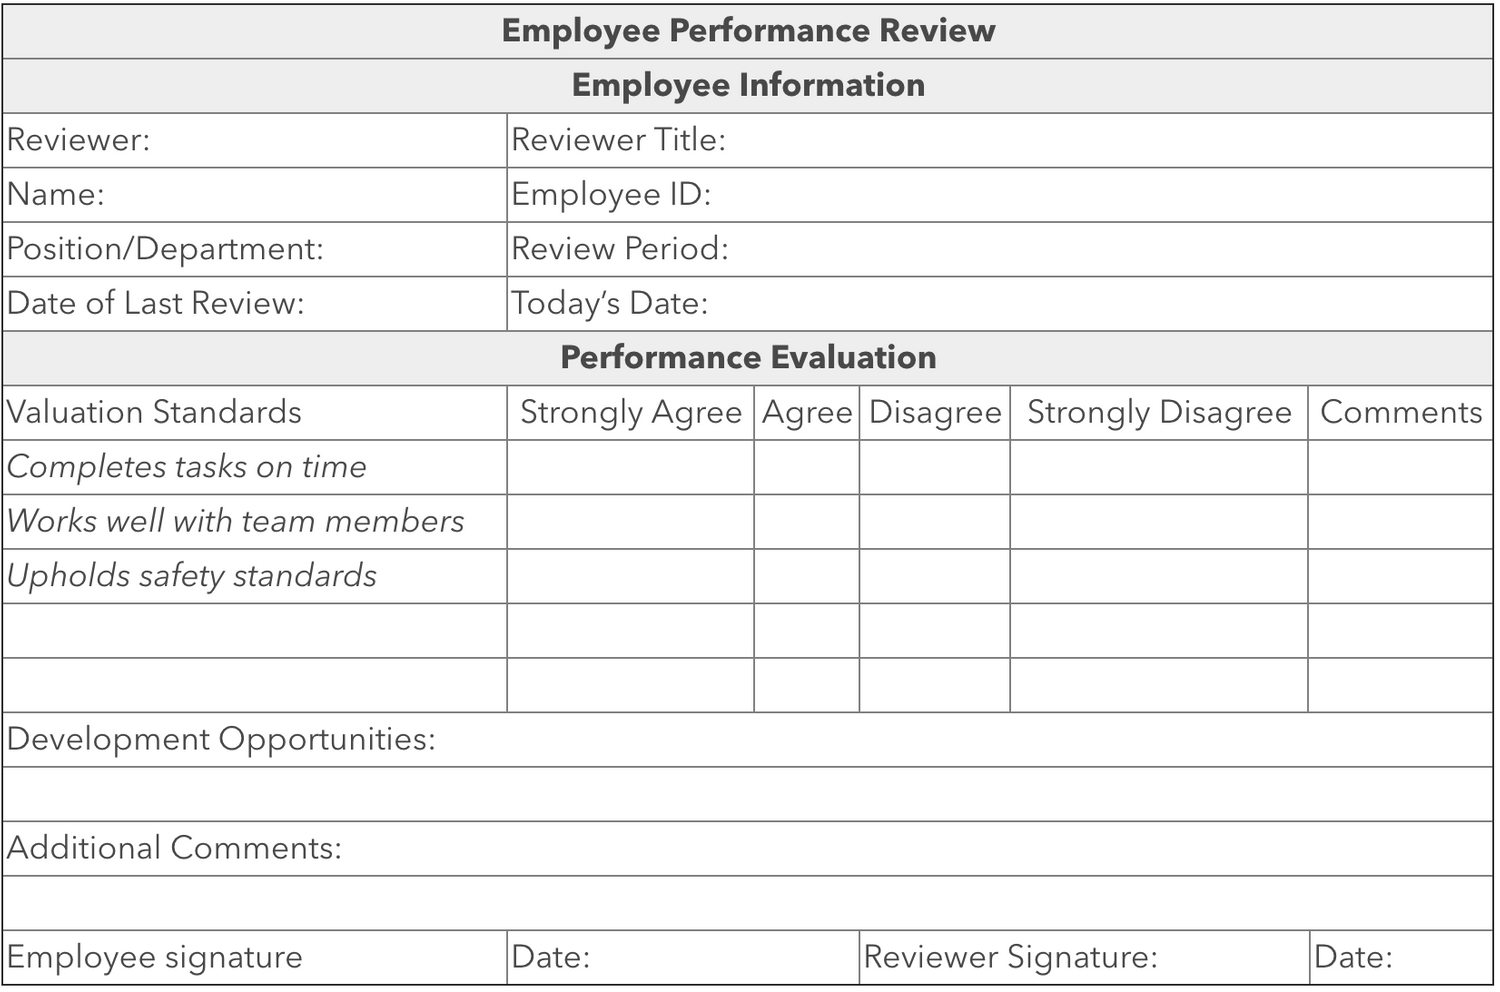 How To Conduct An Employee Performance Review With 